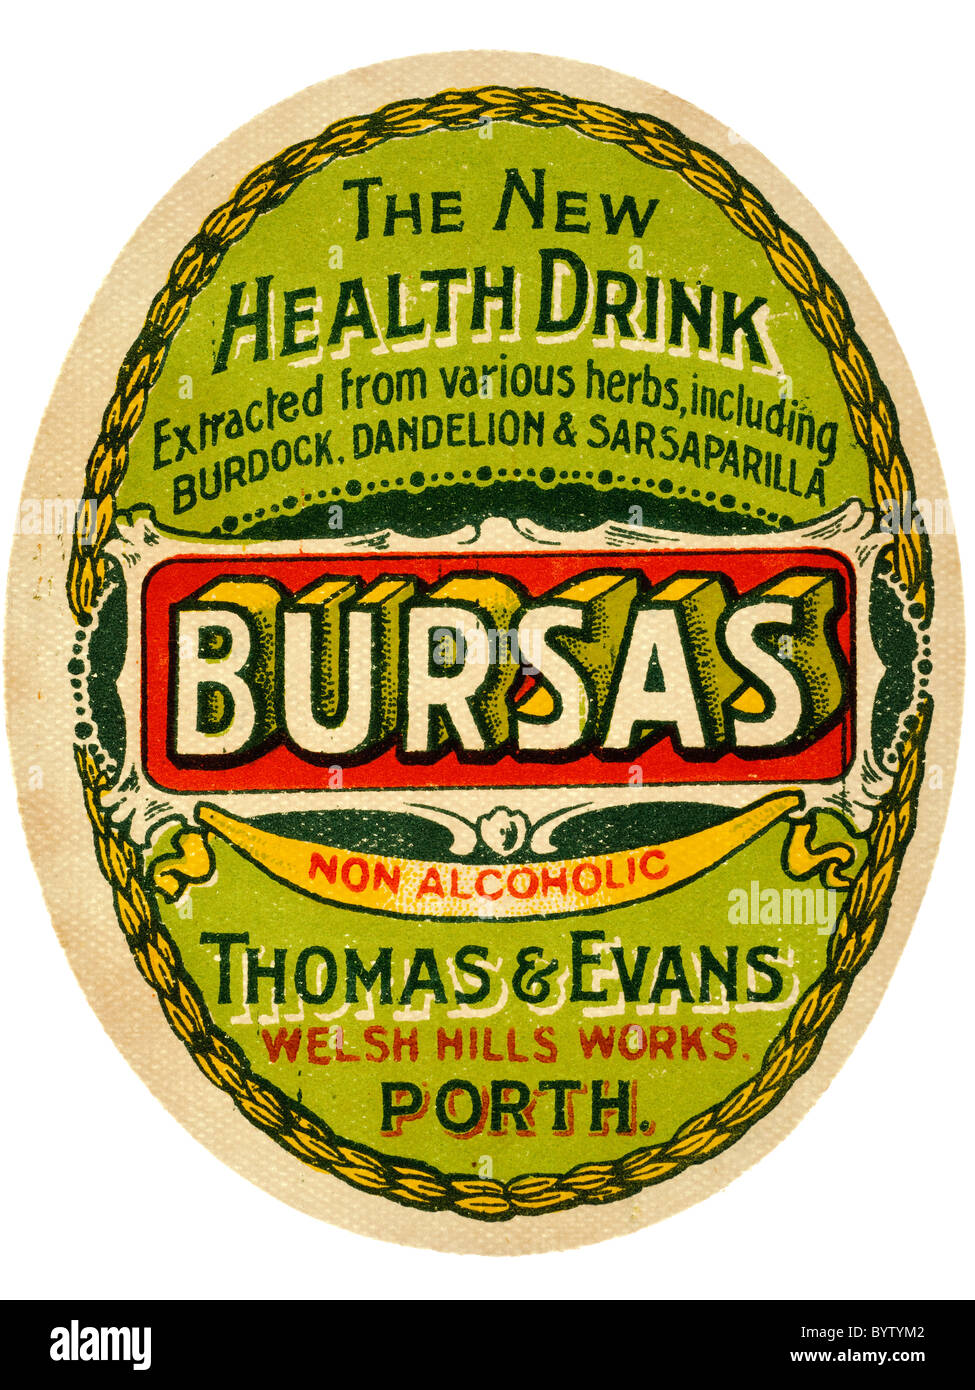 Old paper pop label for Bursas non alcoholic drink from Thomas & Evans Welsh Hills Works Porth. EDITORIAL ONLY Stock Photo